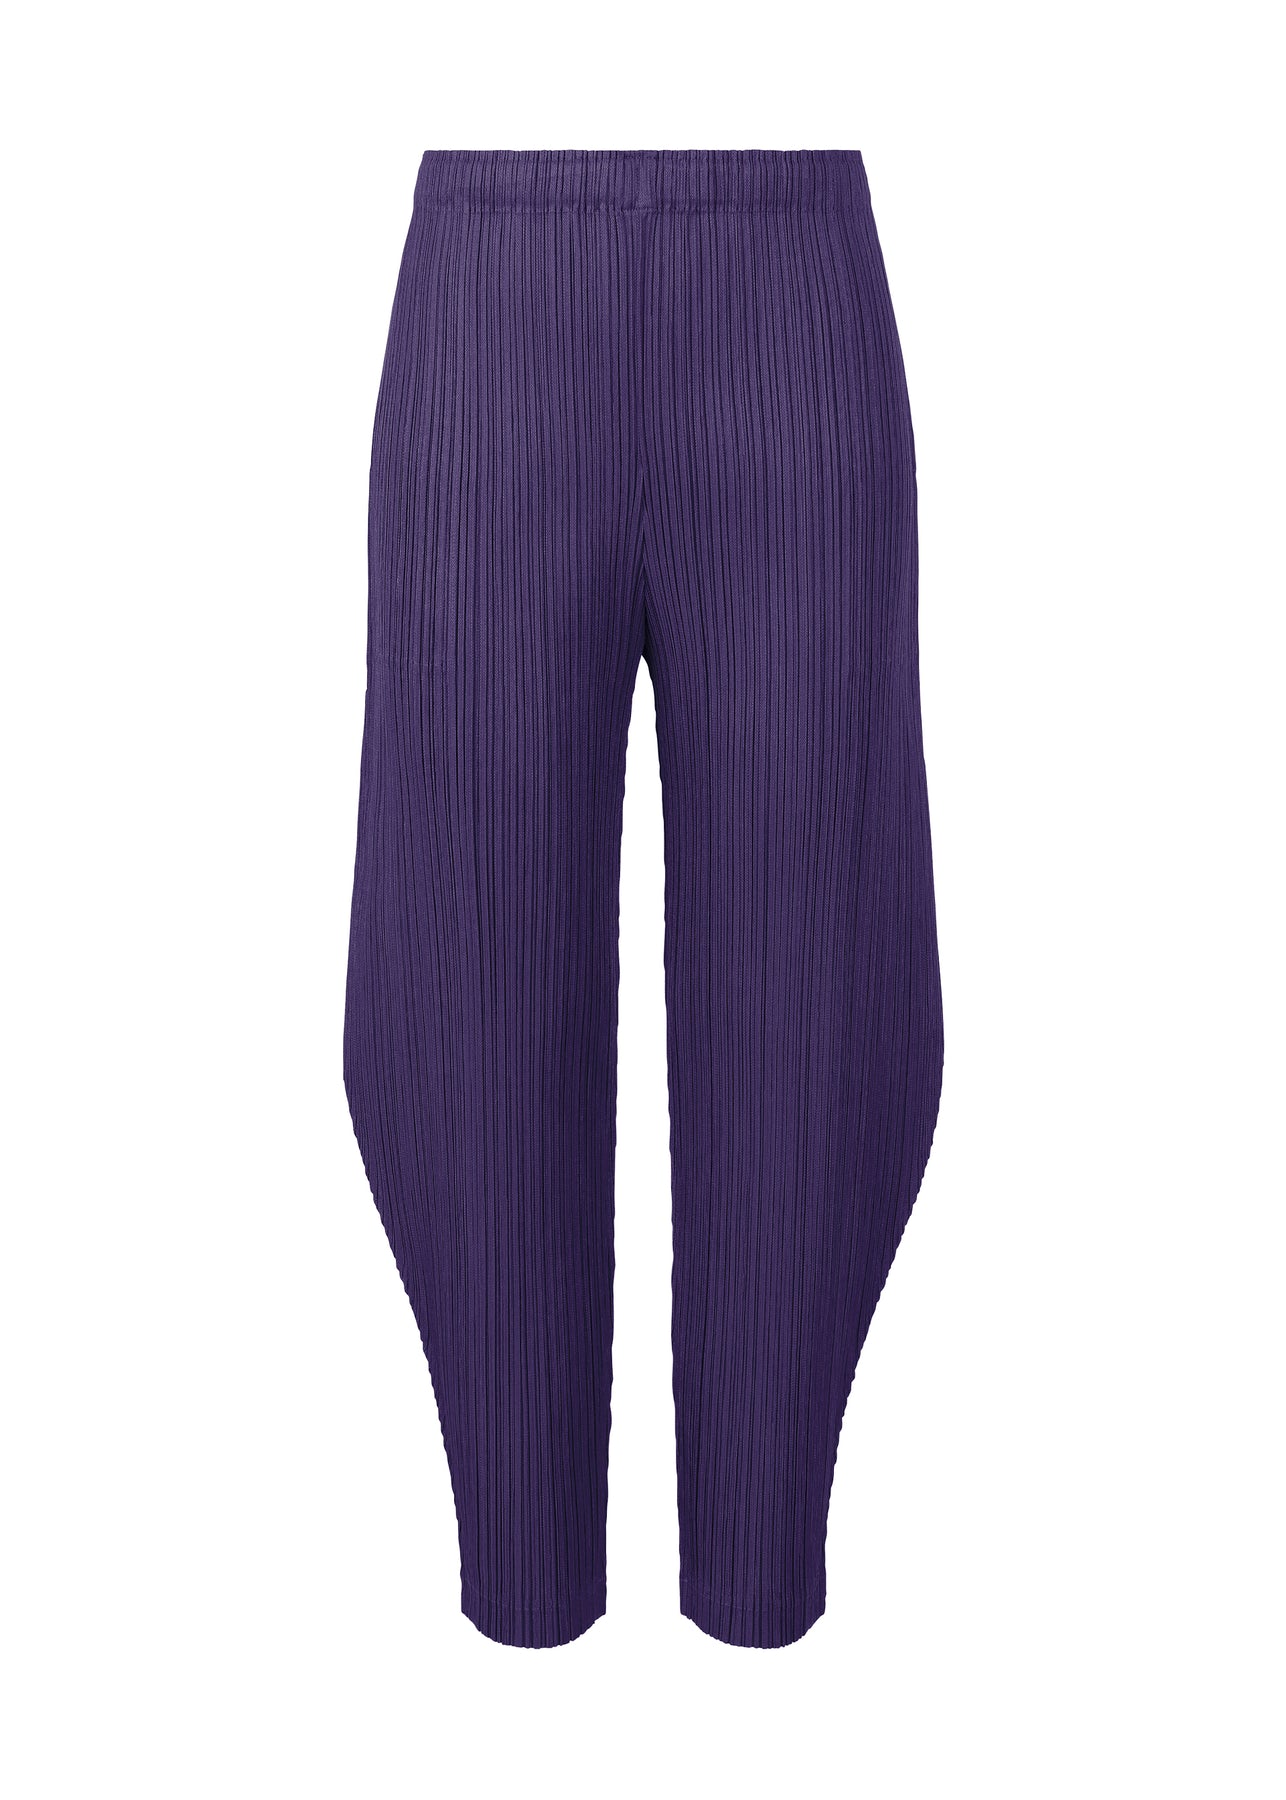 THICKER BOTTOMS 2 PANTS | The official ISSEY MIYAKE ONLINE STORE ...